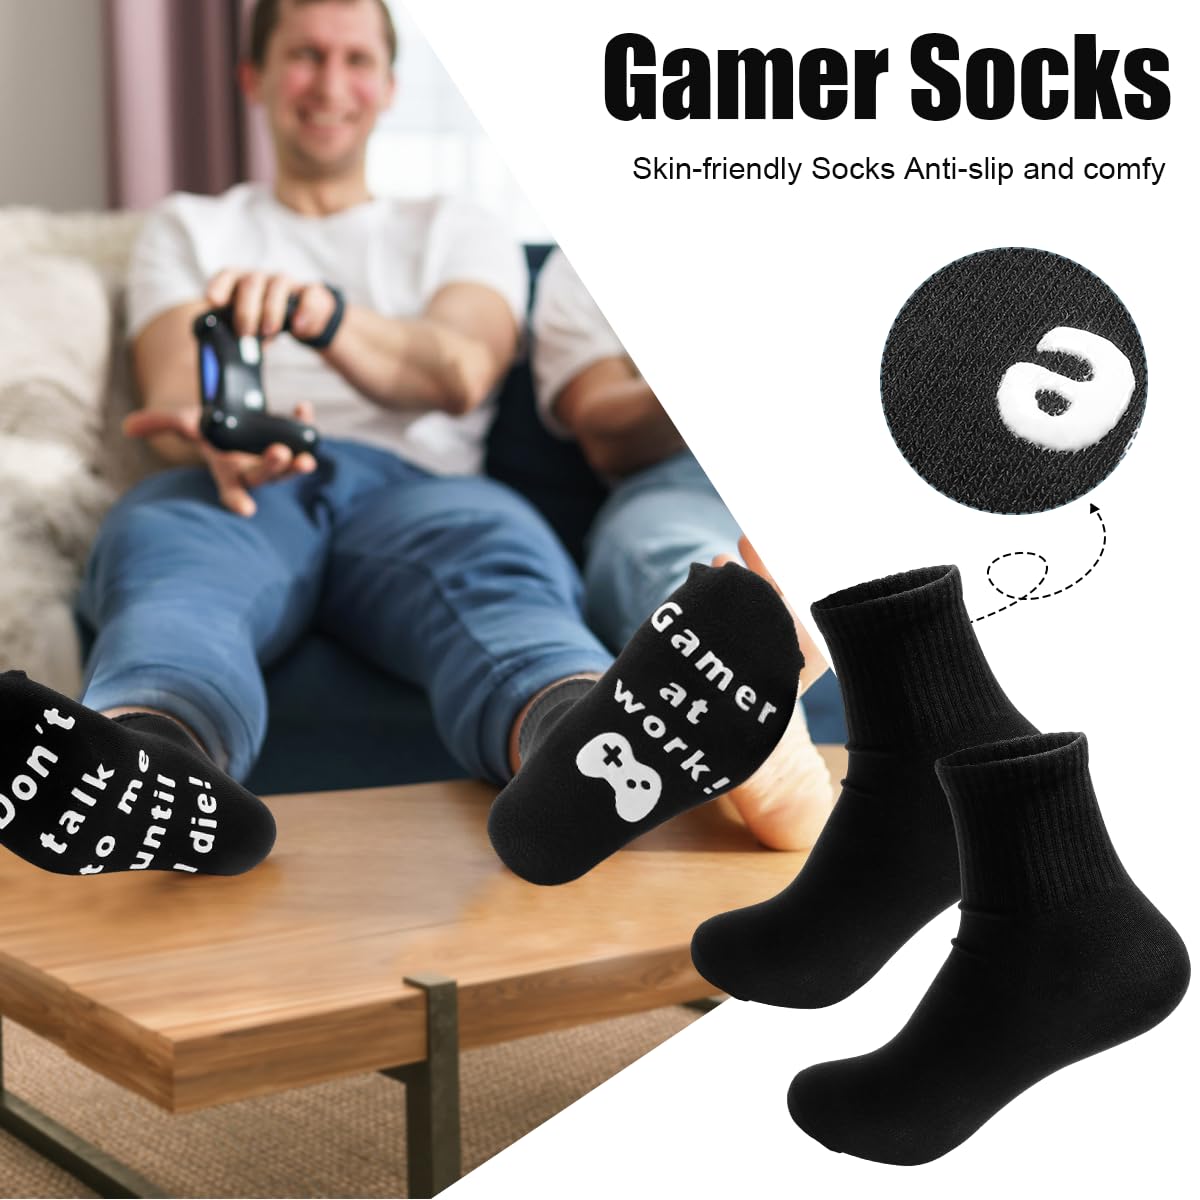 Gamer Gifts, Gaming Gifts for Men, My Gamer Gifts Box- Easter Basket Stuffers (Gamer Tumbler+Pillow Cover+ Socks+Stainless Sign) for Men, Him, Teen Boys, Boyfriends, Father, Gamers, Video Game Lover - amzGamess